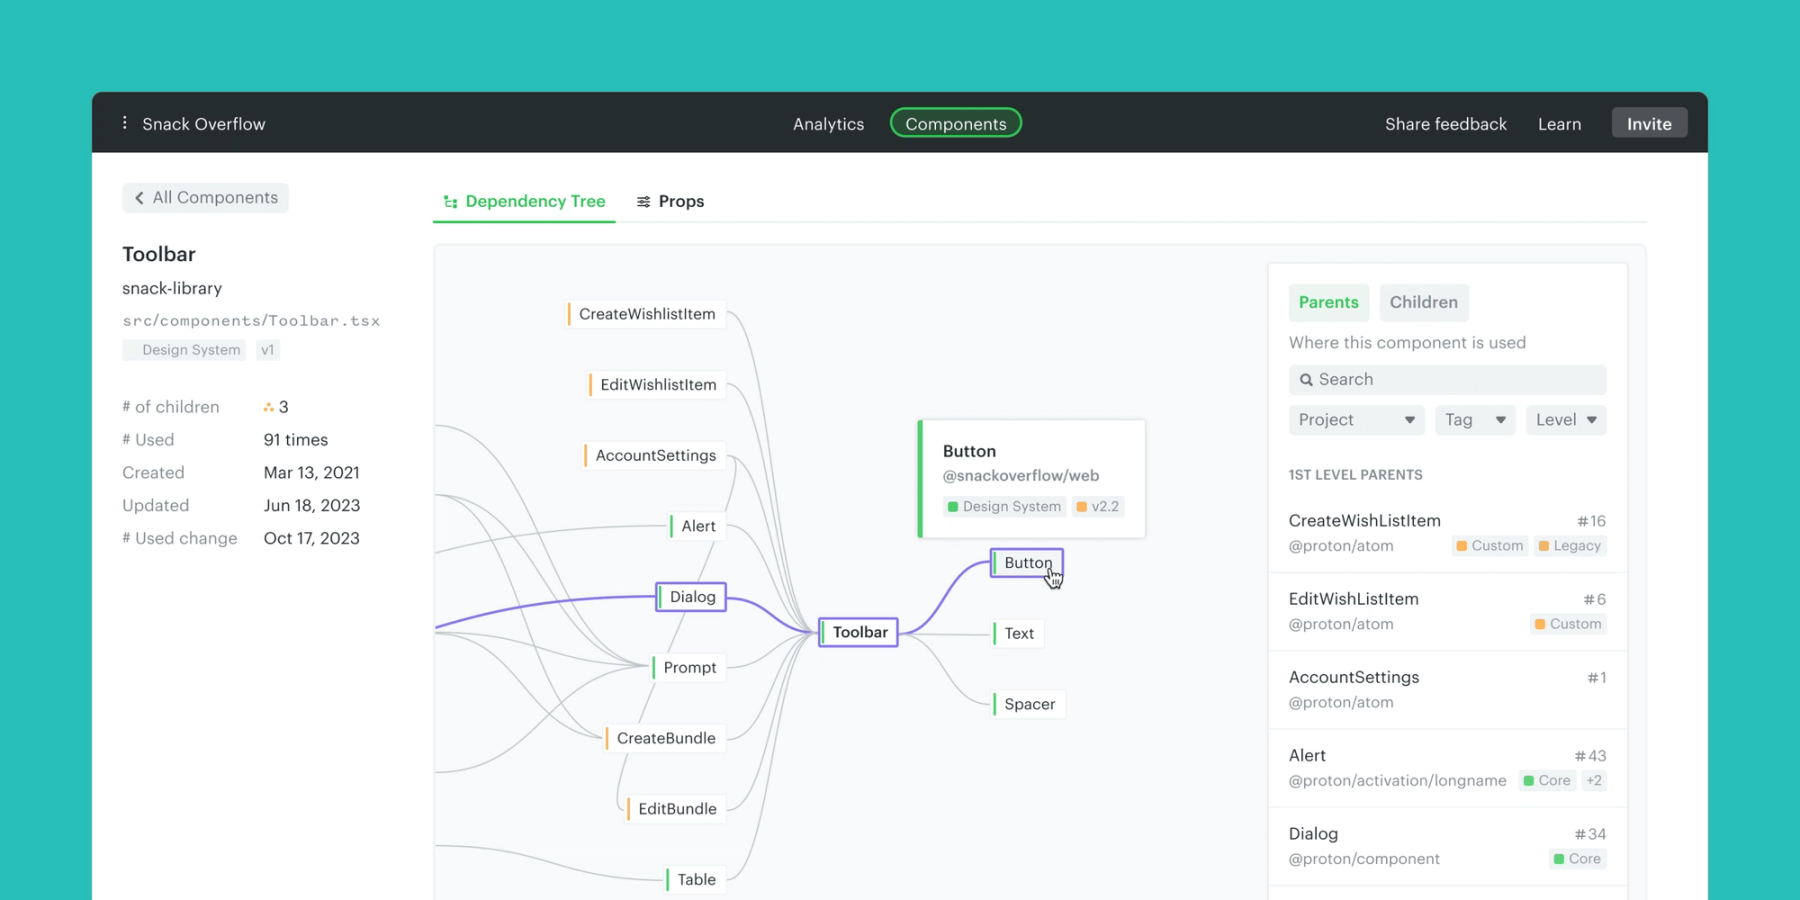 Omlet dependency tree view showing the impact of migrating design system components 